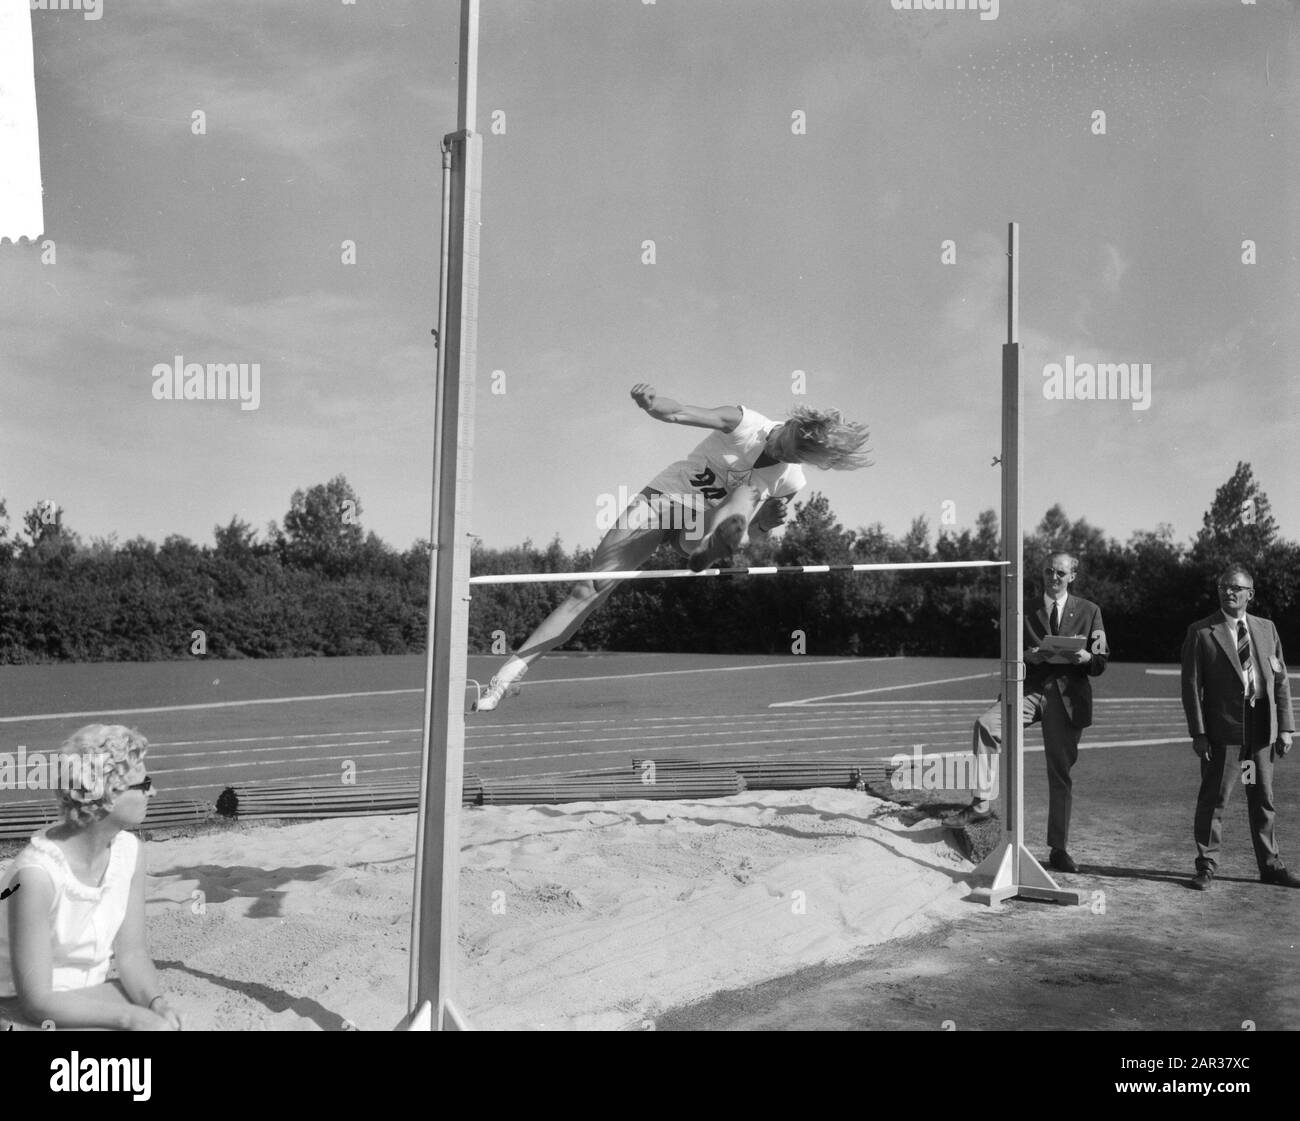 Dutch athletics championships in Groningen, Miss M. Thomas, in action high jump Date: August 14, 1965 Location: Groningen Keywords: athletics, championships Person name: Thomas, M. Stock Photo